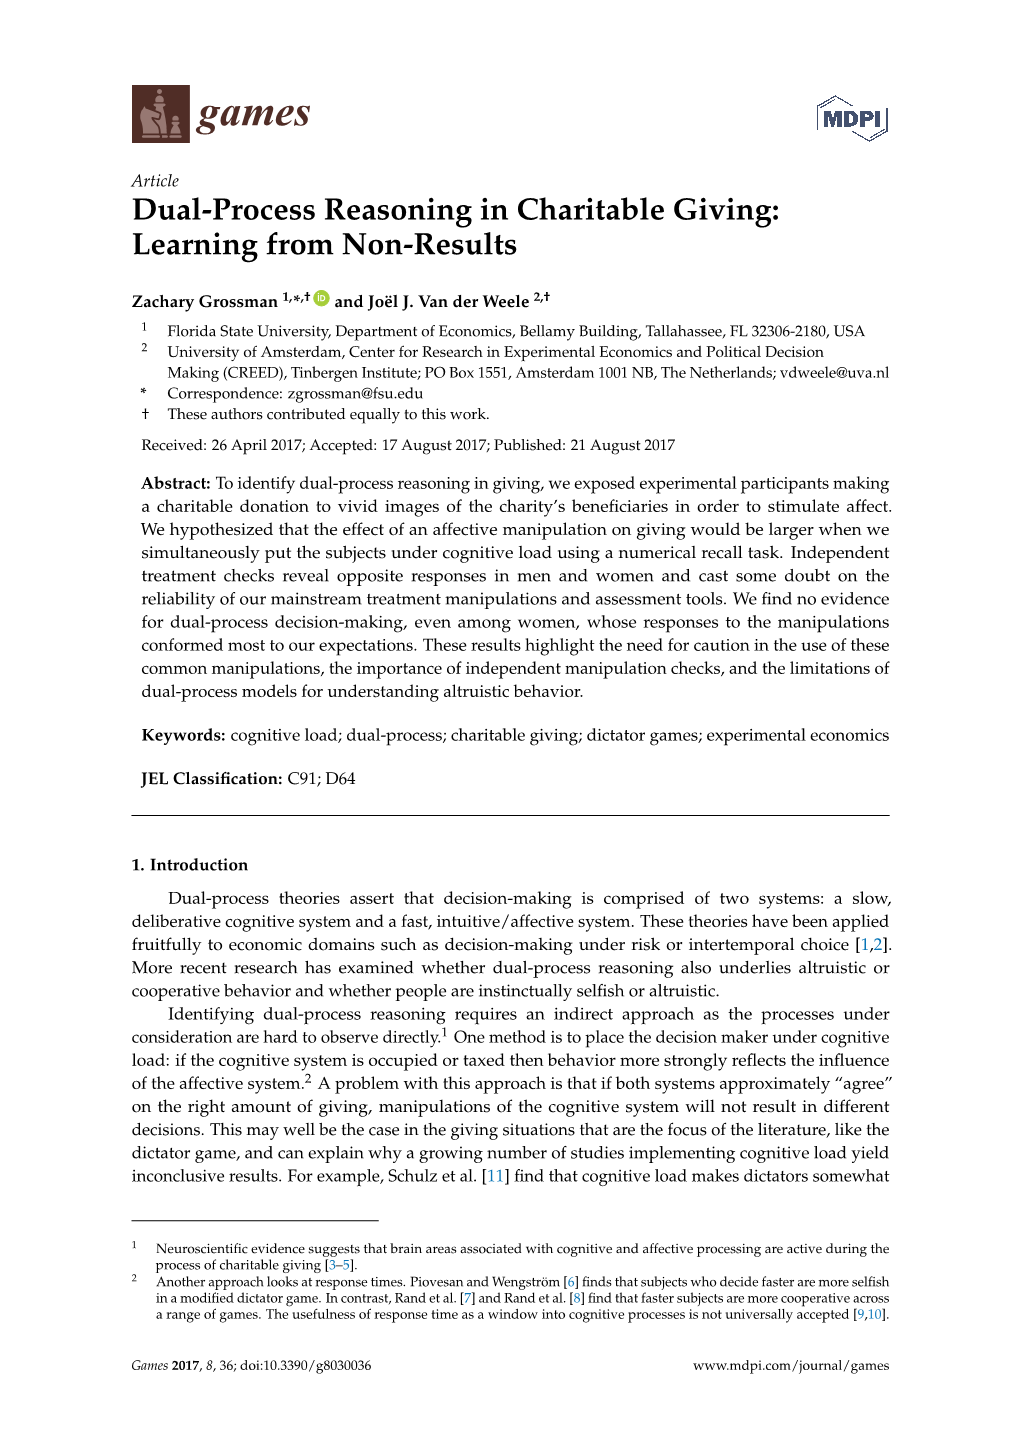 Dual-Process Reasoning in Charitable Giving: Learning from Non-Results